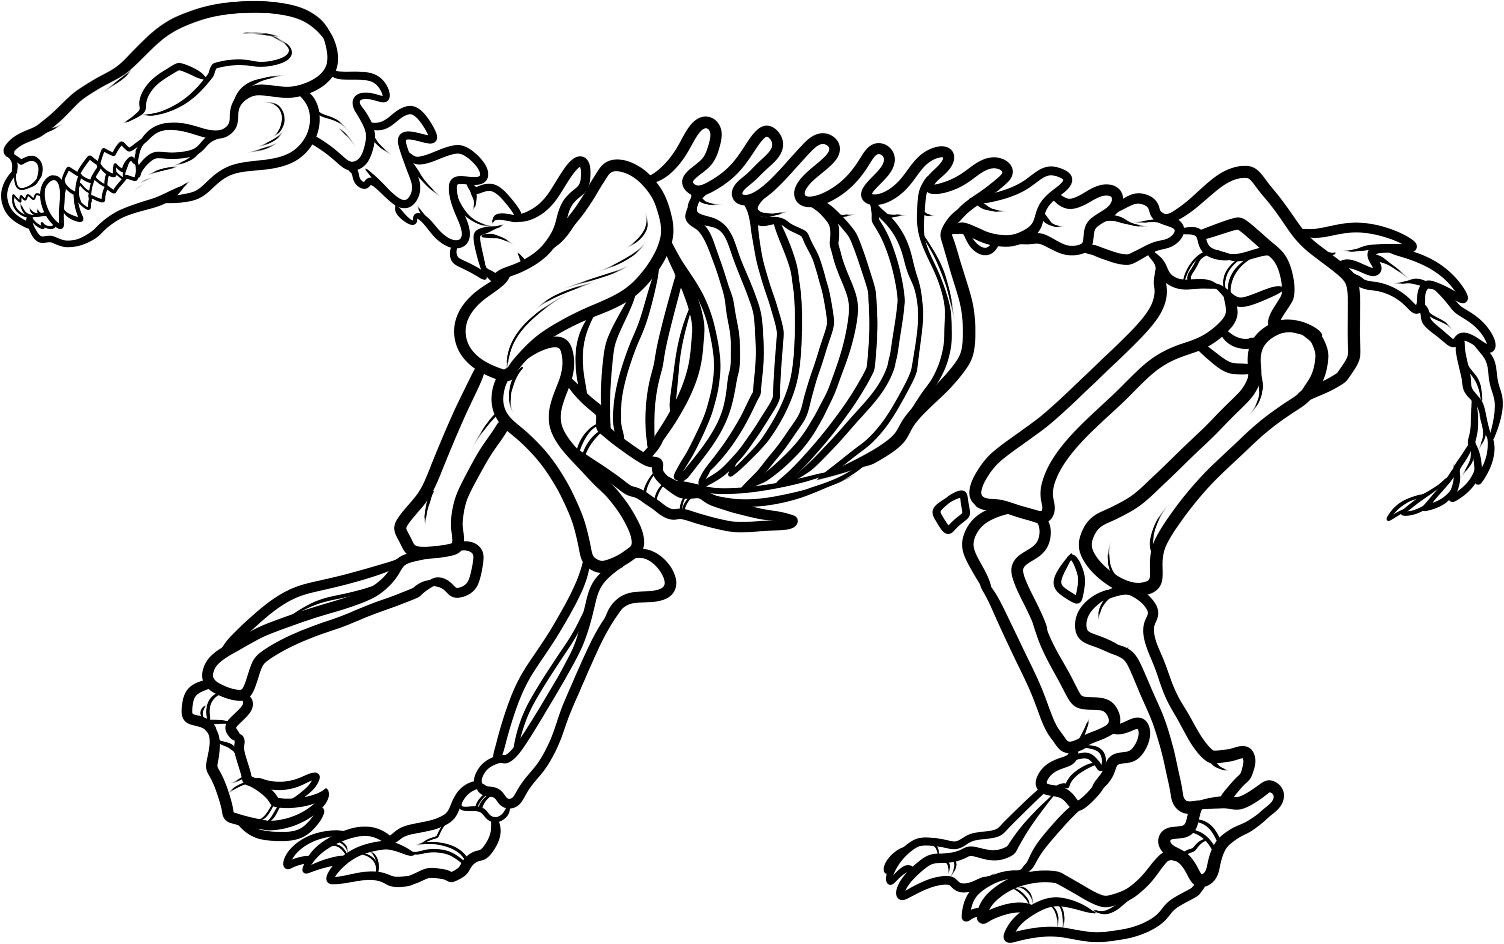 fossil clipart dino fossil